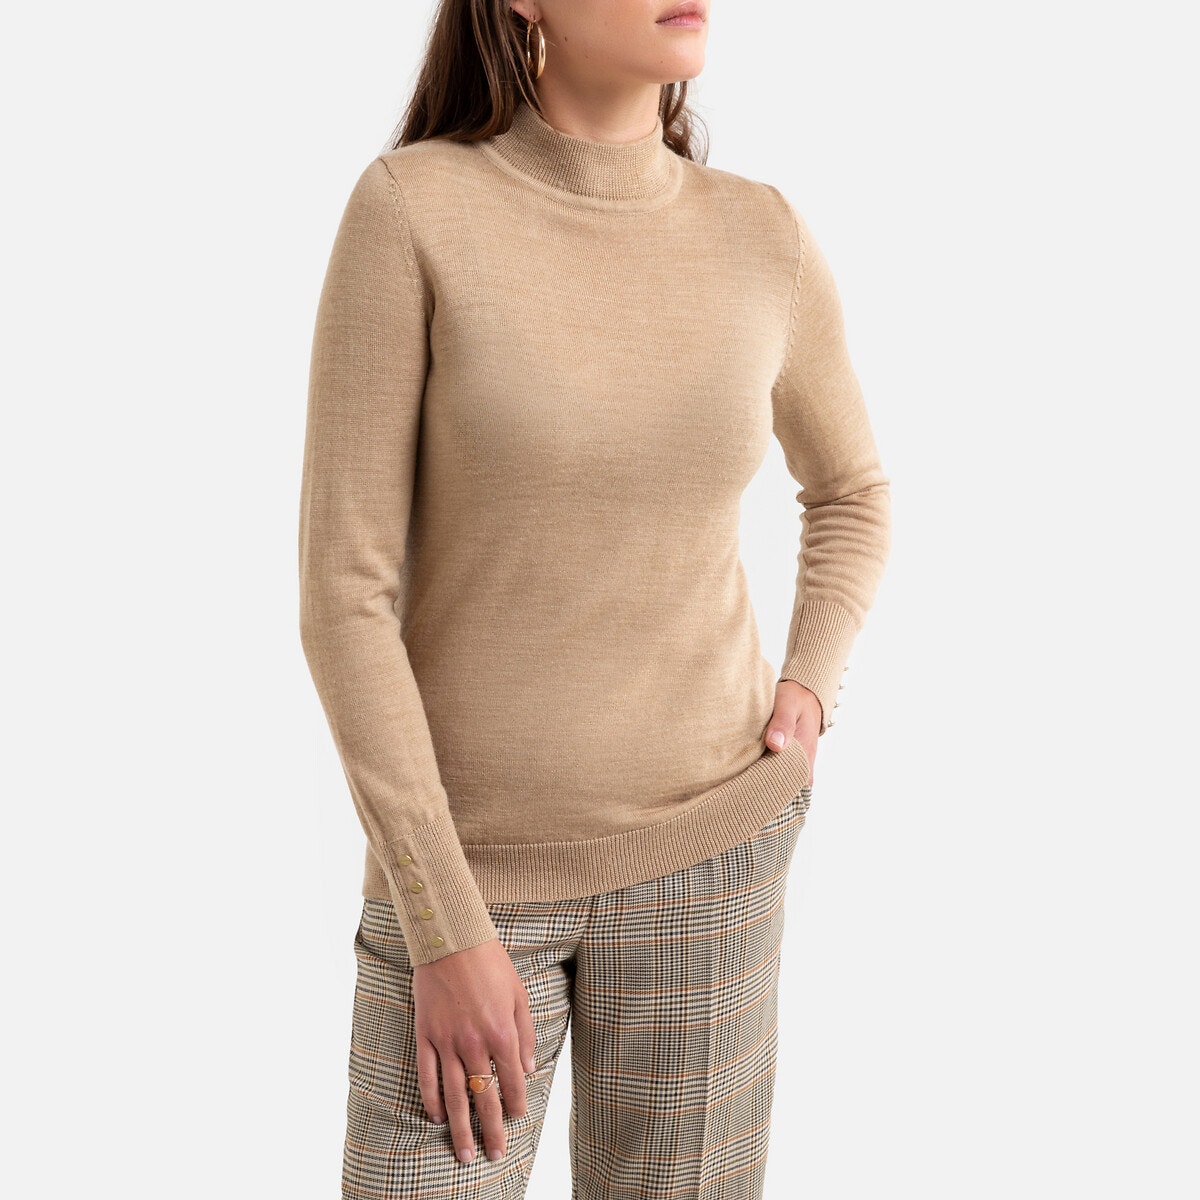 Merino Wool Mix Fine Knit Jumper Sweater with High Neck